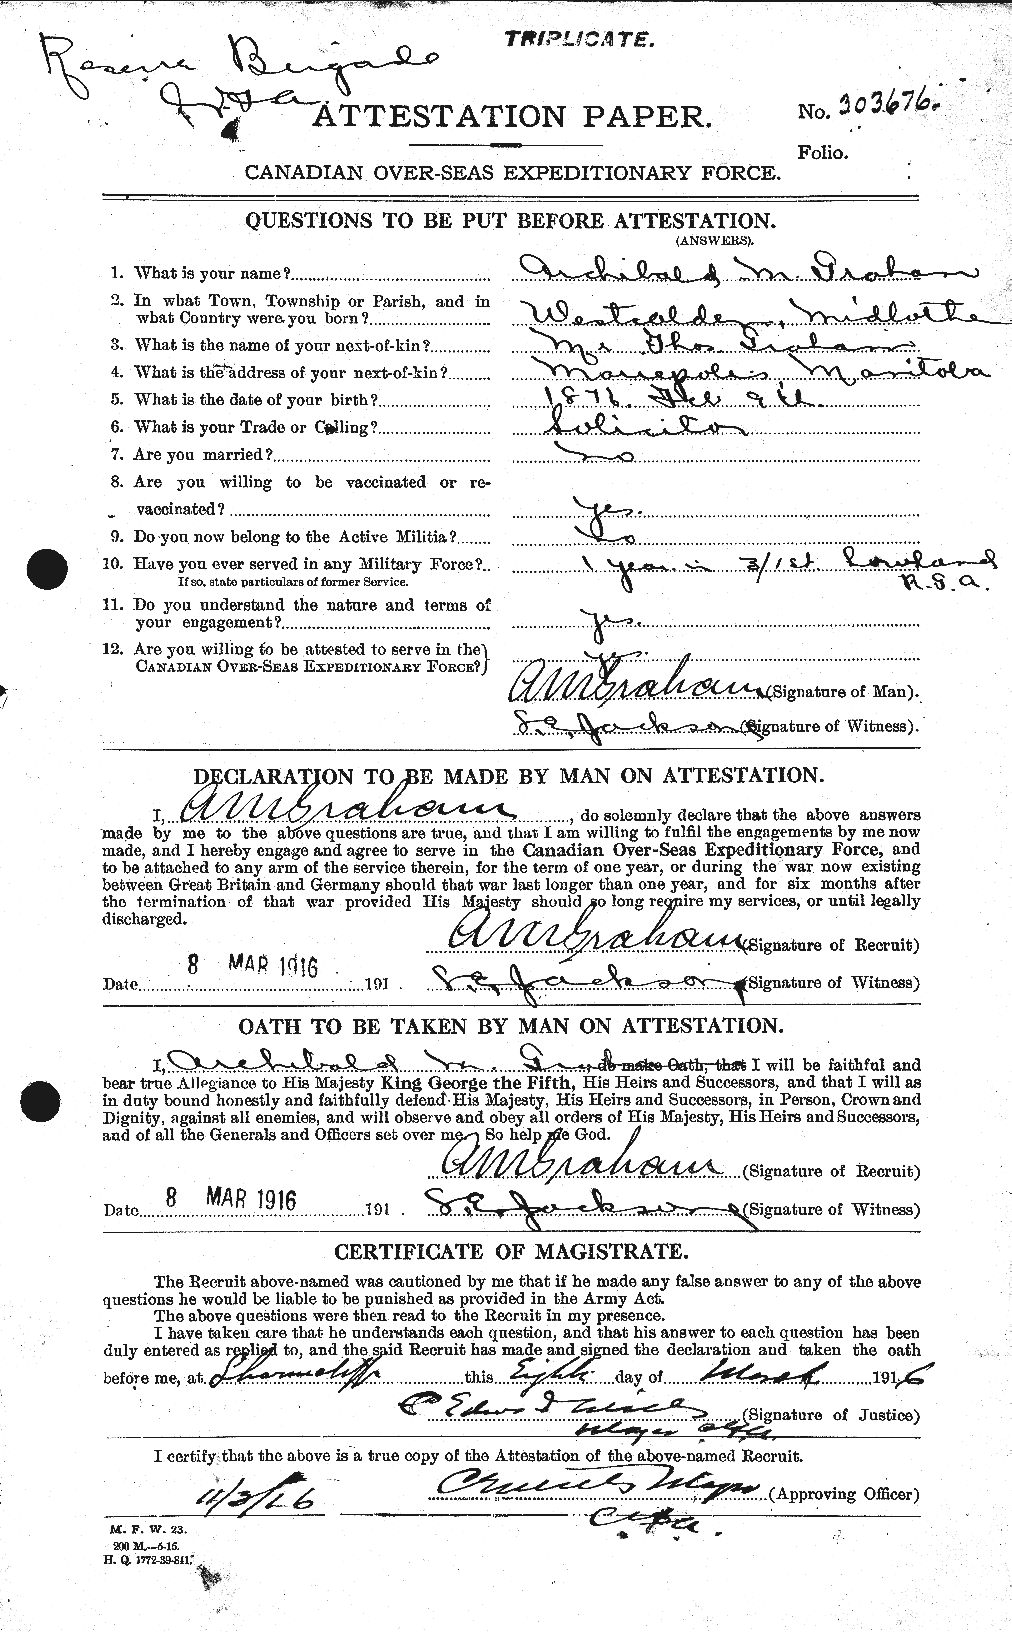 Personnel Records of the First World War - CEF 359640a